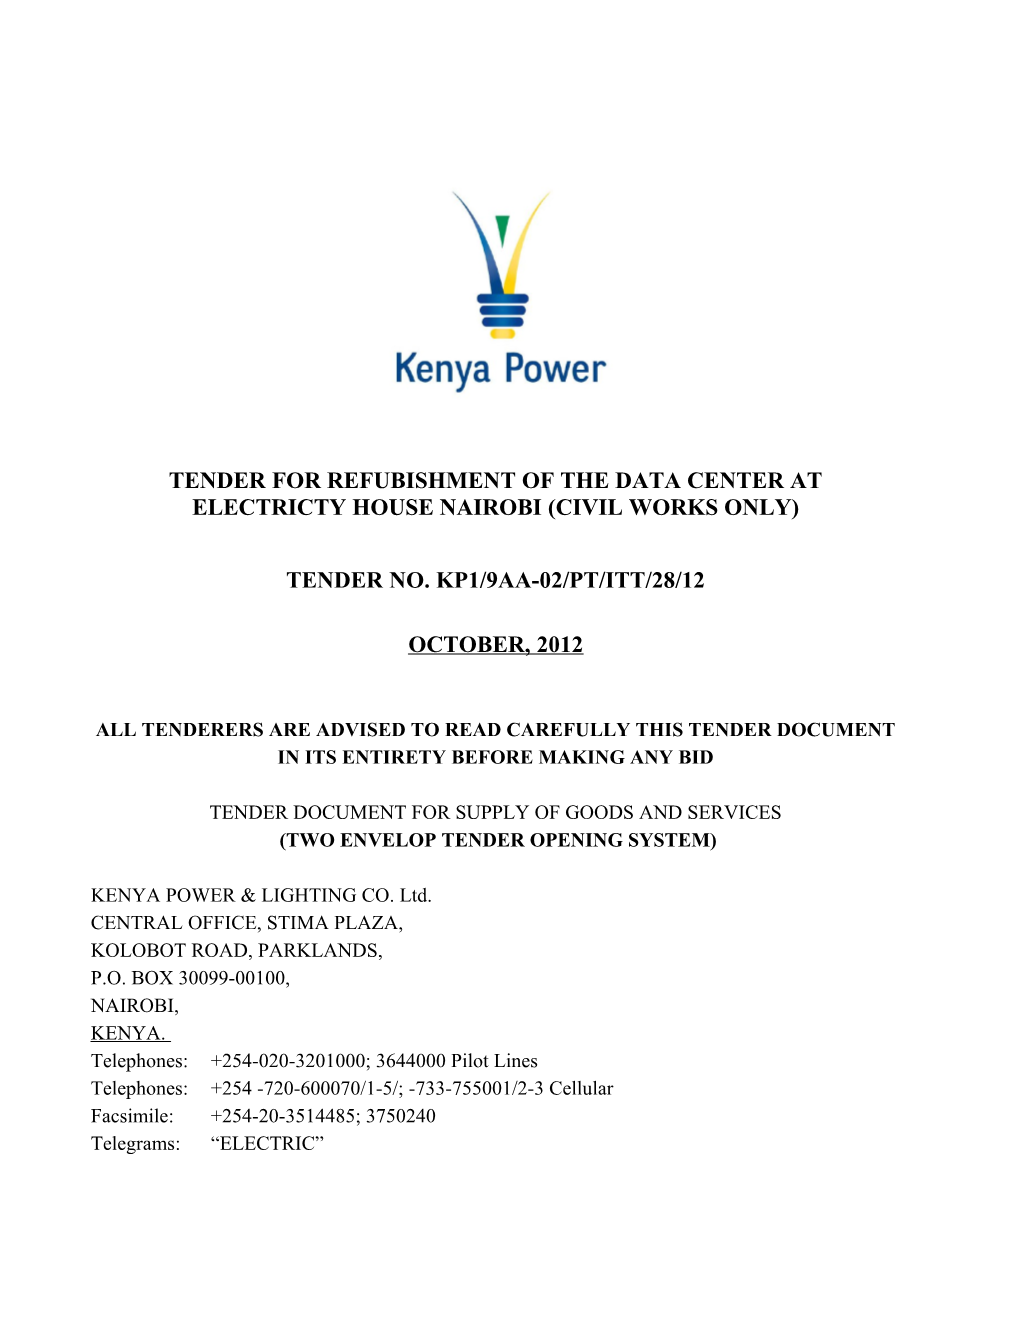 Tender for Refubishment of the Data Center at Electricty House Nairobi (Civil Works Only)